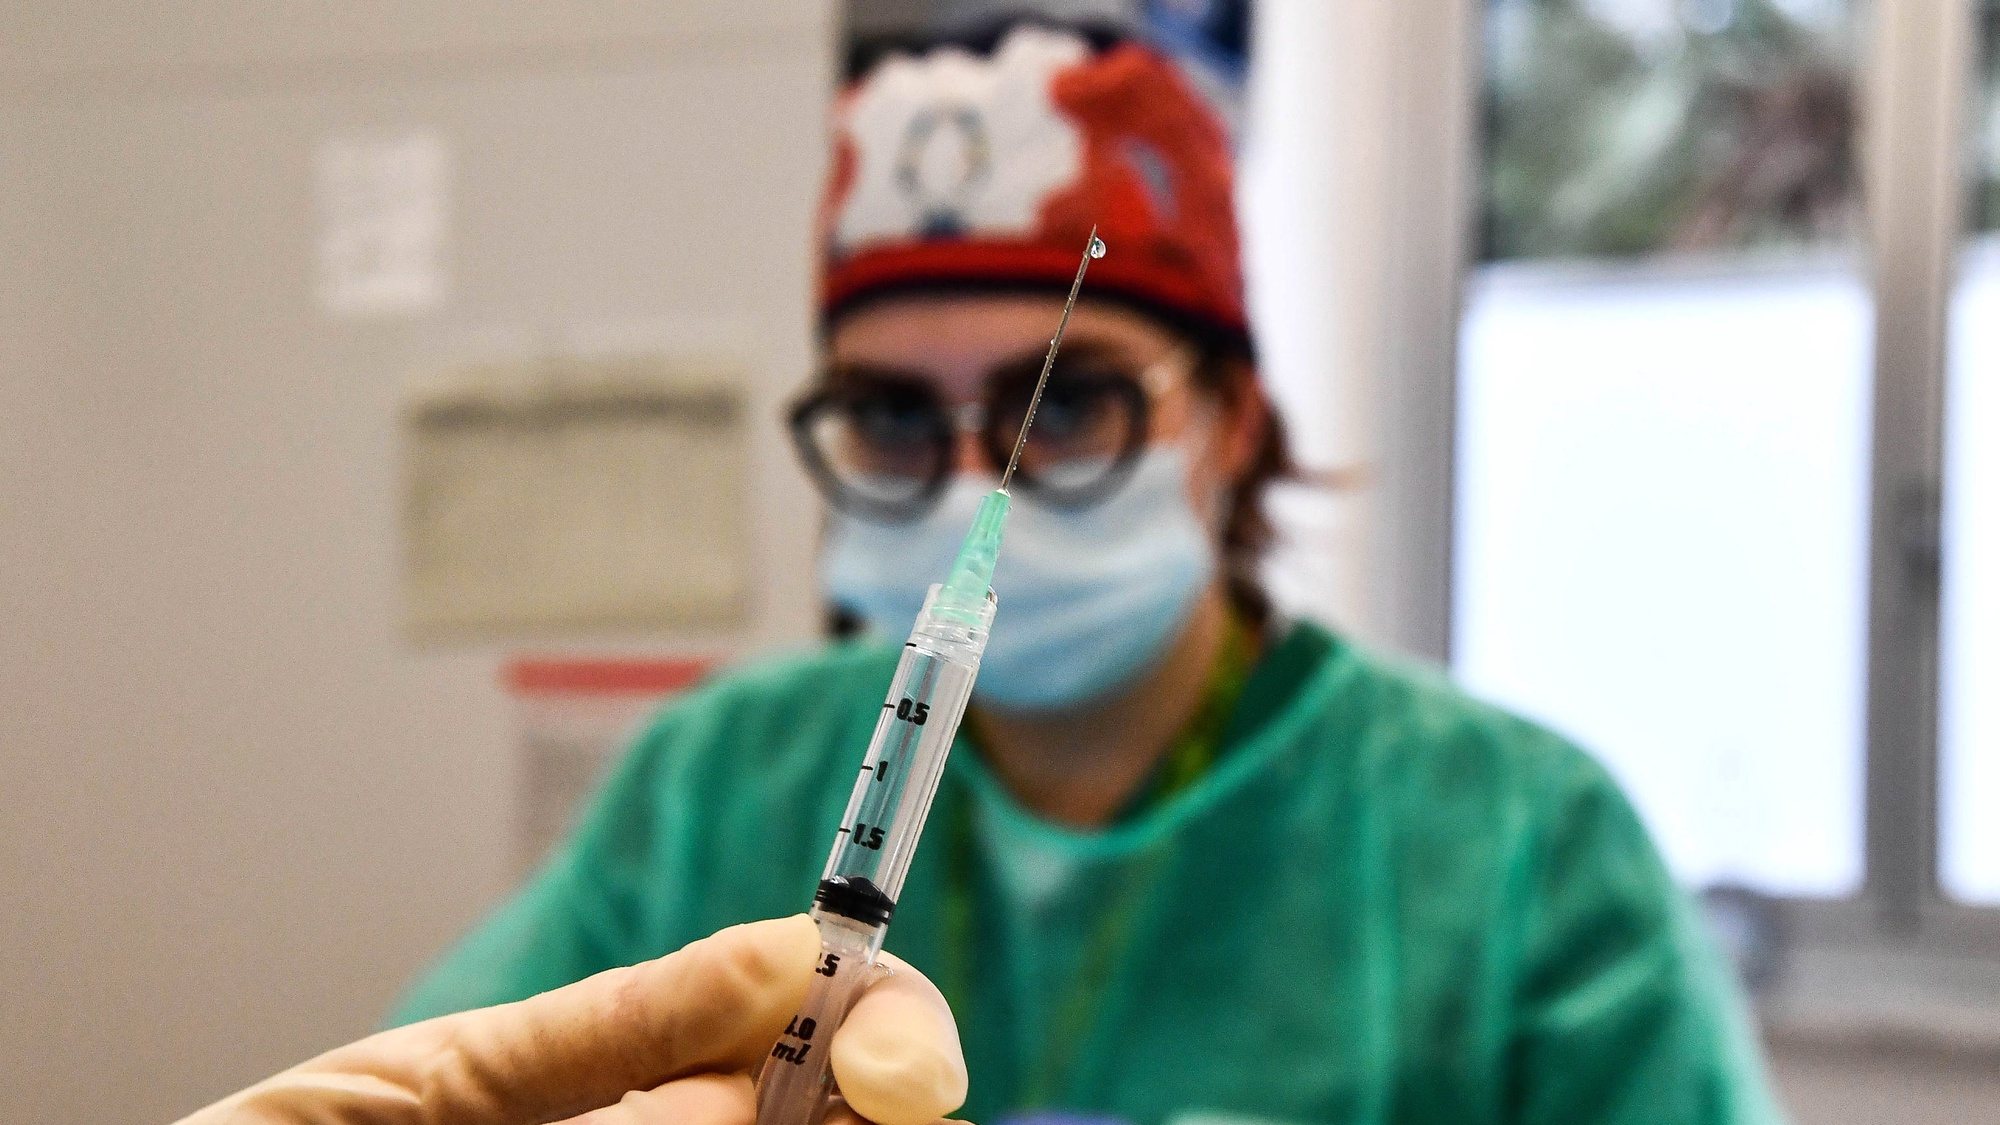 epa08920745 A healthcare worker prepares a syringe with a dose of the Pfizer-BioNTech vaccine at the Villa Scassi Hospital in Genoa, Italy, 05 January 2021. A second batch of 470,000 doses of the Pfizer-BioNTech COVID-19 vaccine reportedly has arrived in Italy and more than 100,000 people have been vaccinated with it so far in Italy.  EPA/LUCA ZENNARO